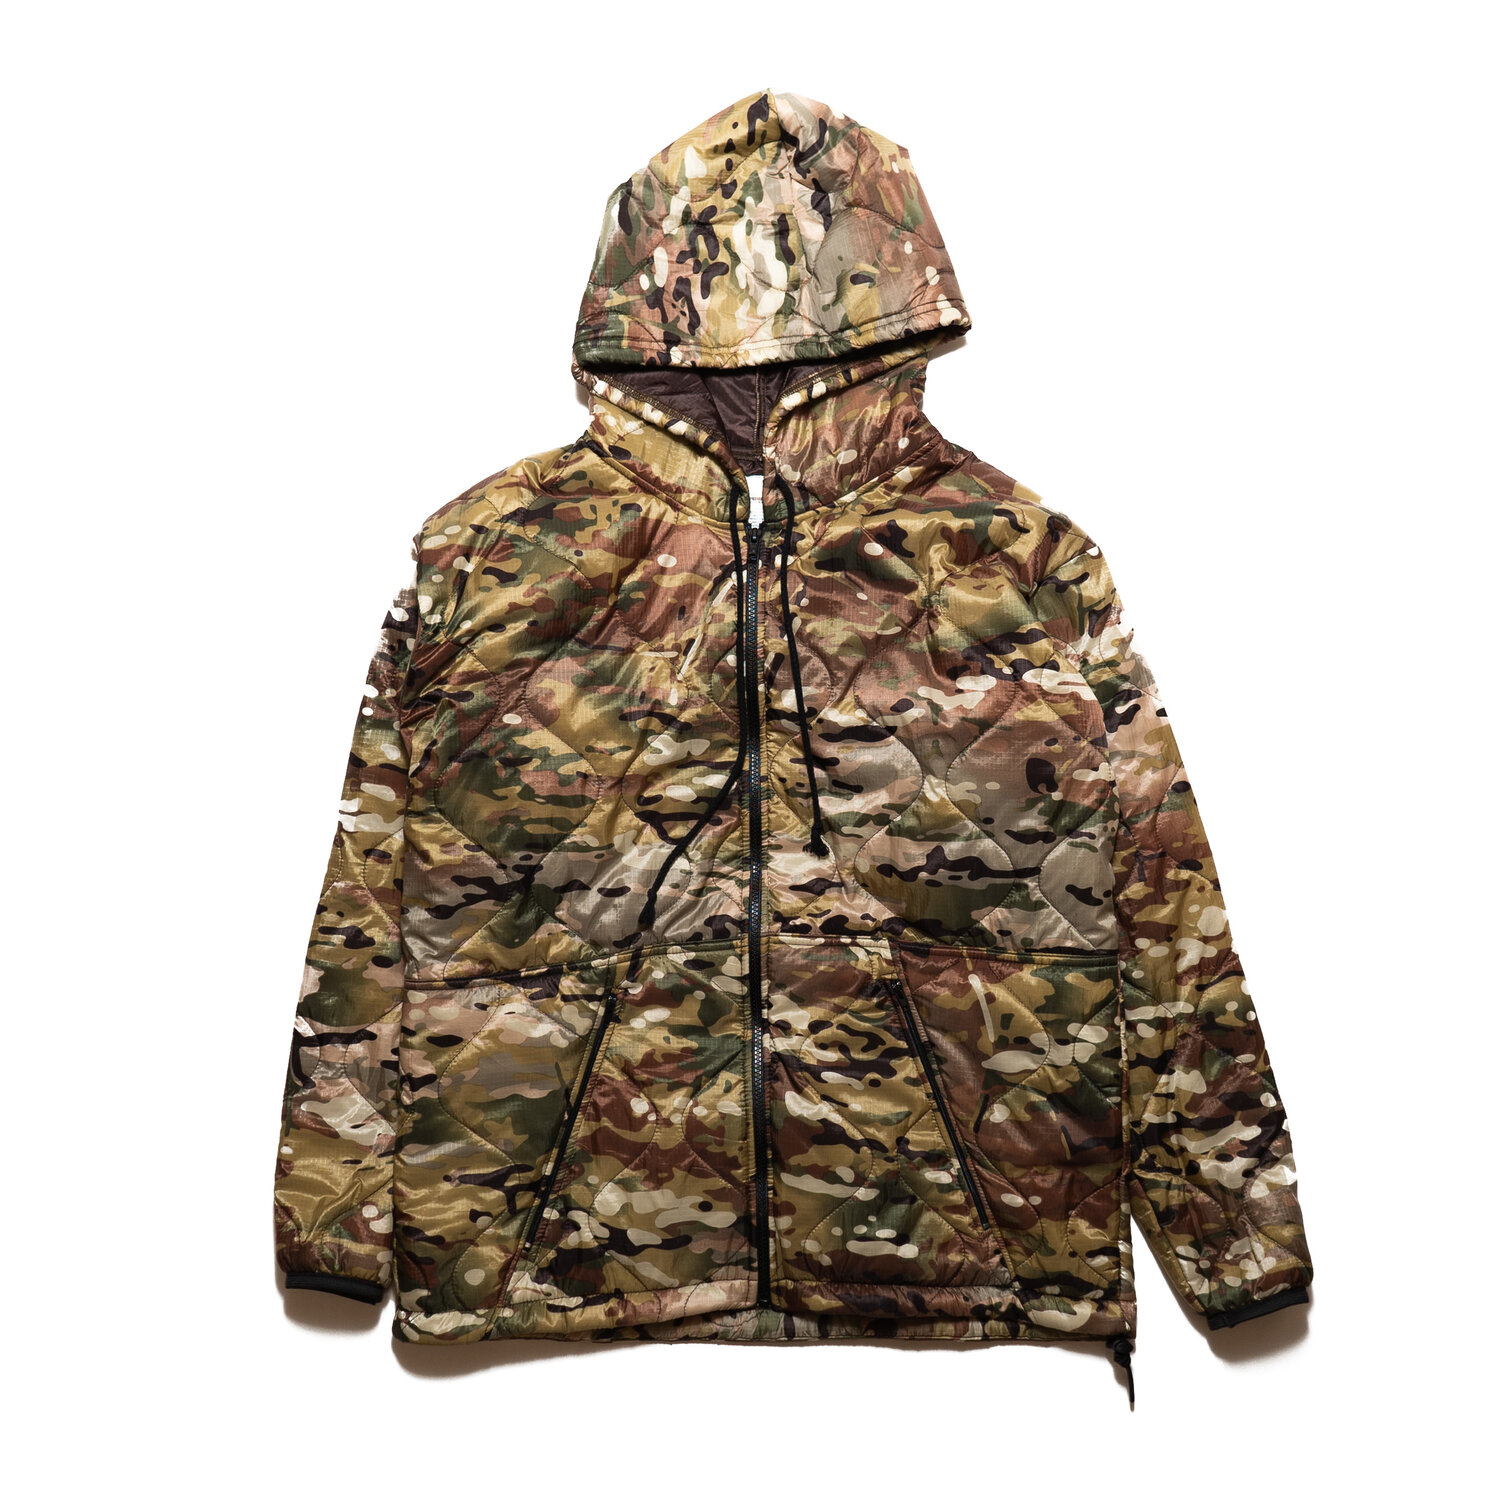 A-Type Jacket | Perseverance Survival | American-Made Woobie